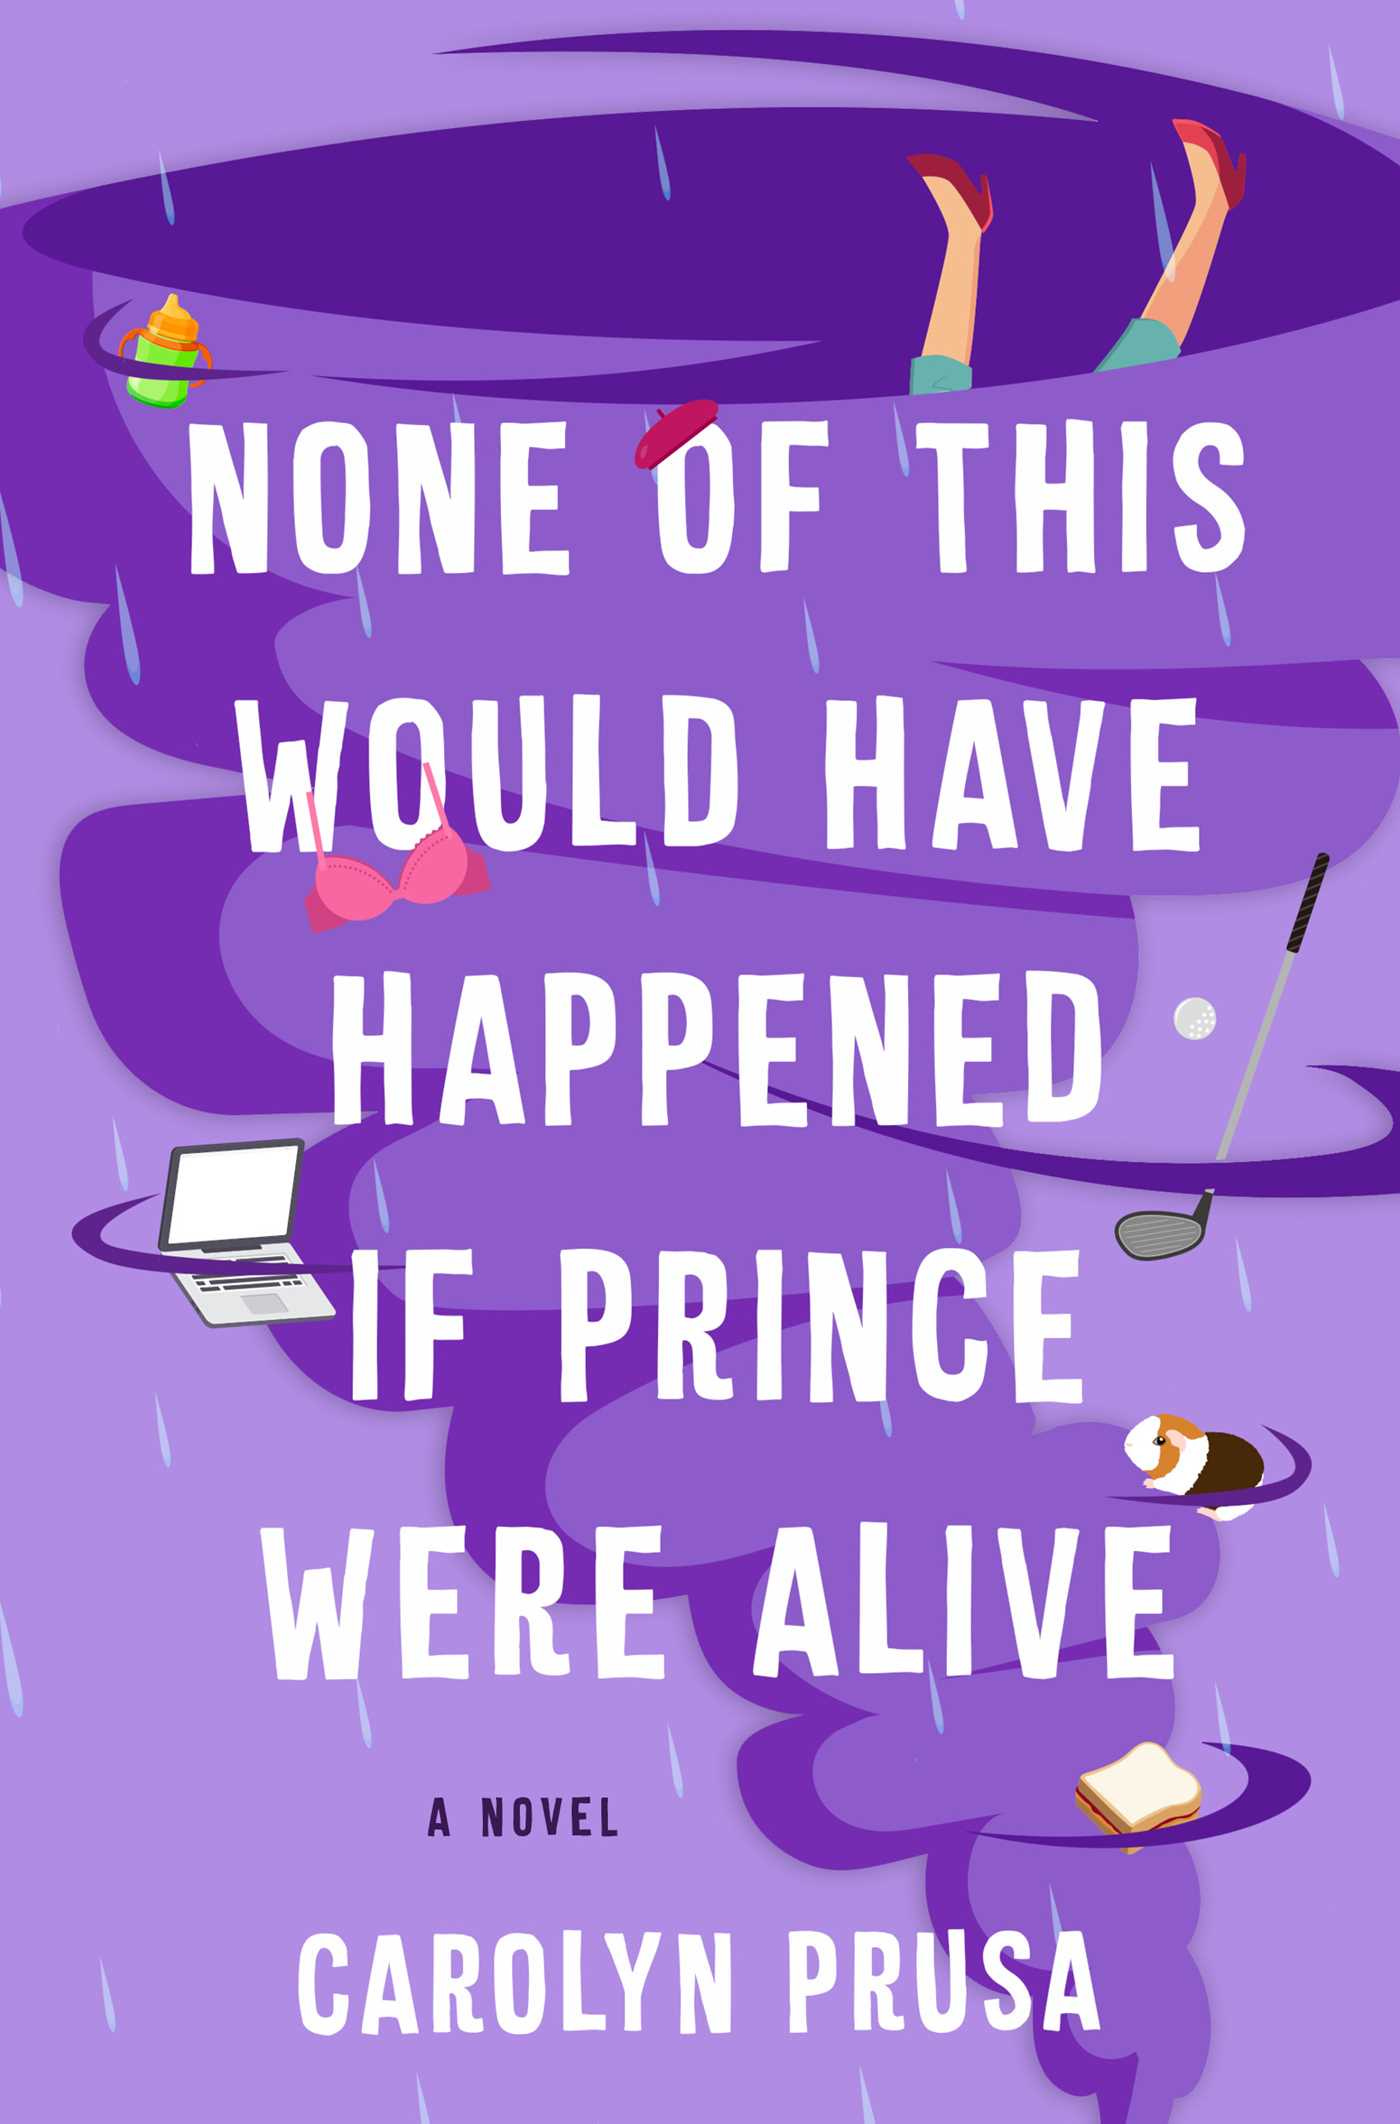 Photo of book with purple cover called None of This Would Have Happened If Prince Were Alive. It's written by Carolyn Prusa. 